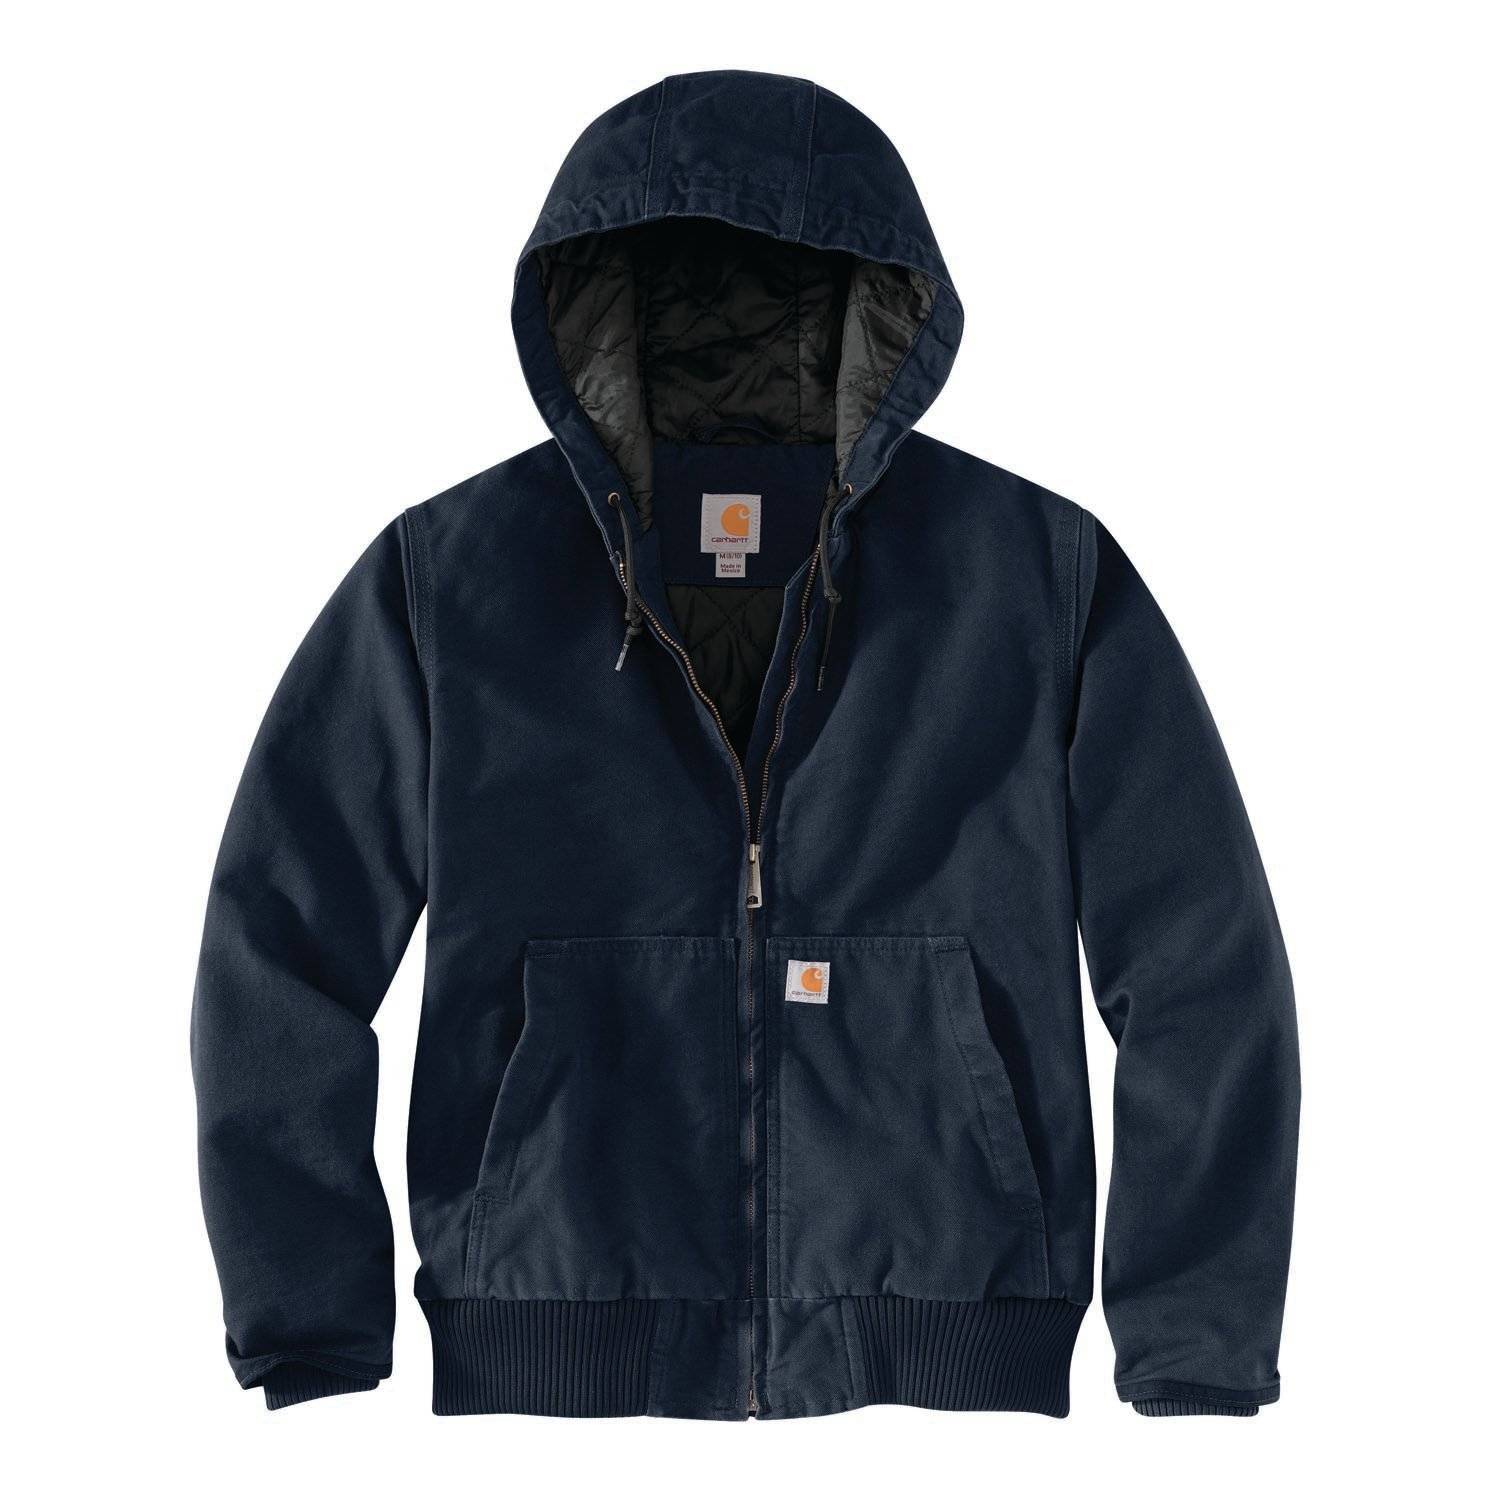 Carhartt Women's Loose Fit Washed Duck Insulated Jacket